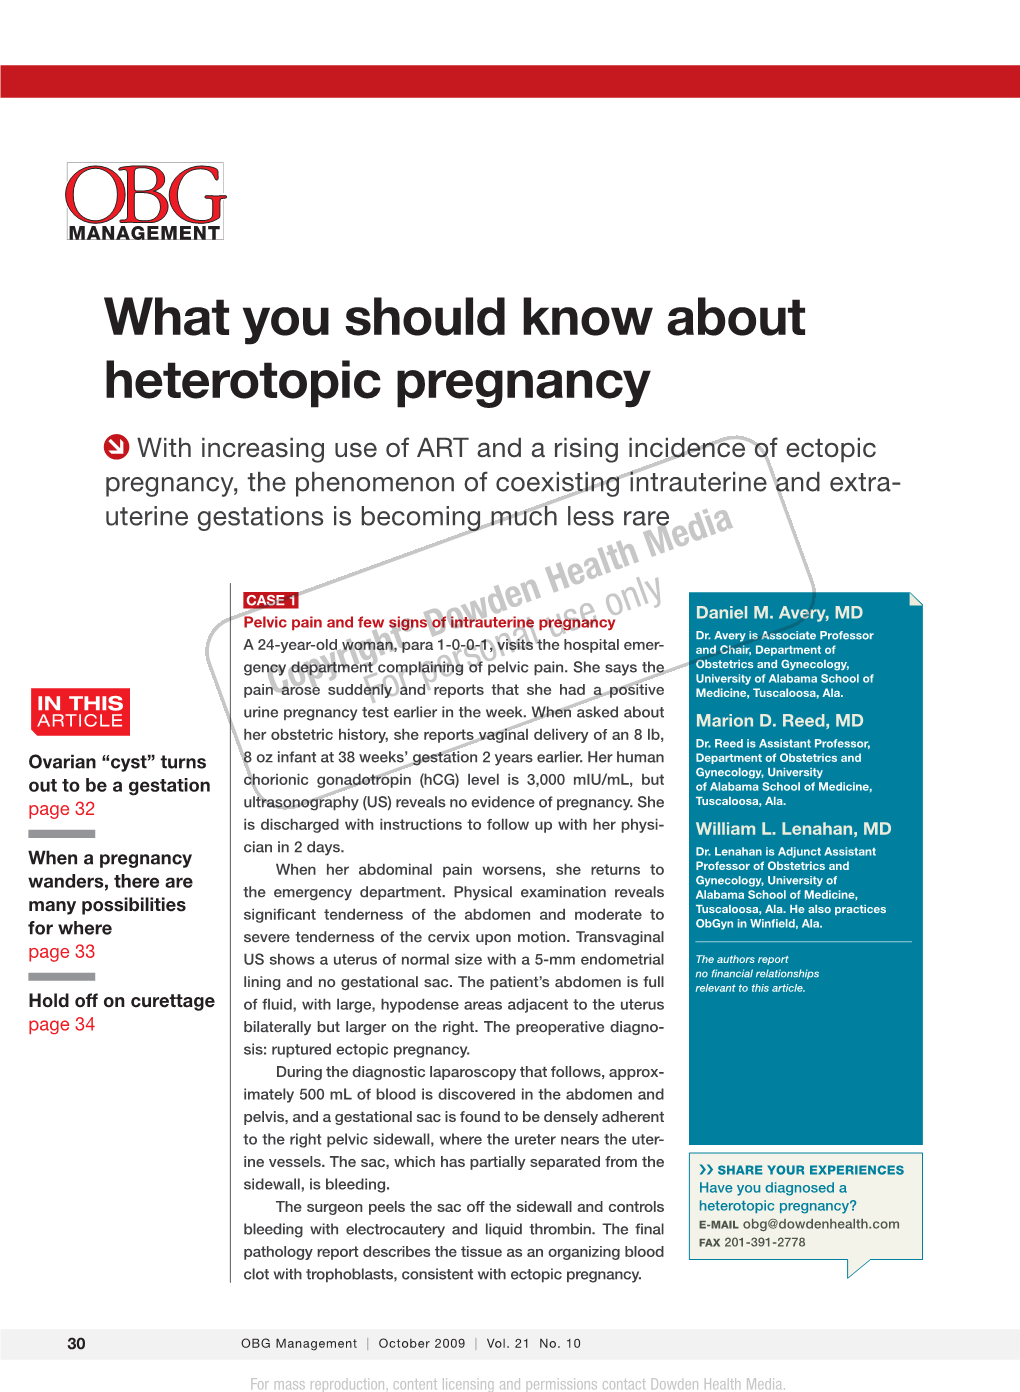 What You Should Know About Heterotopic Pregnancy